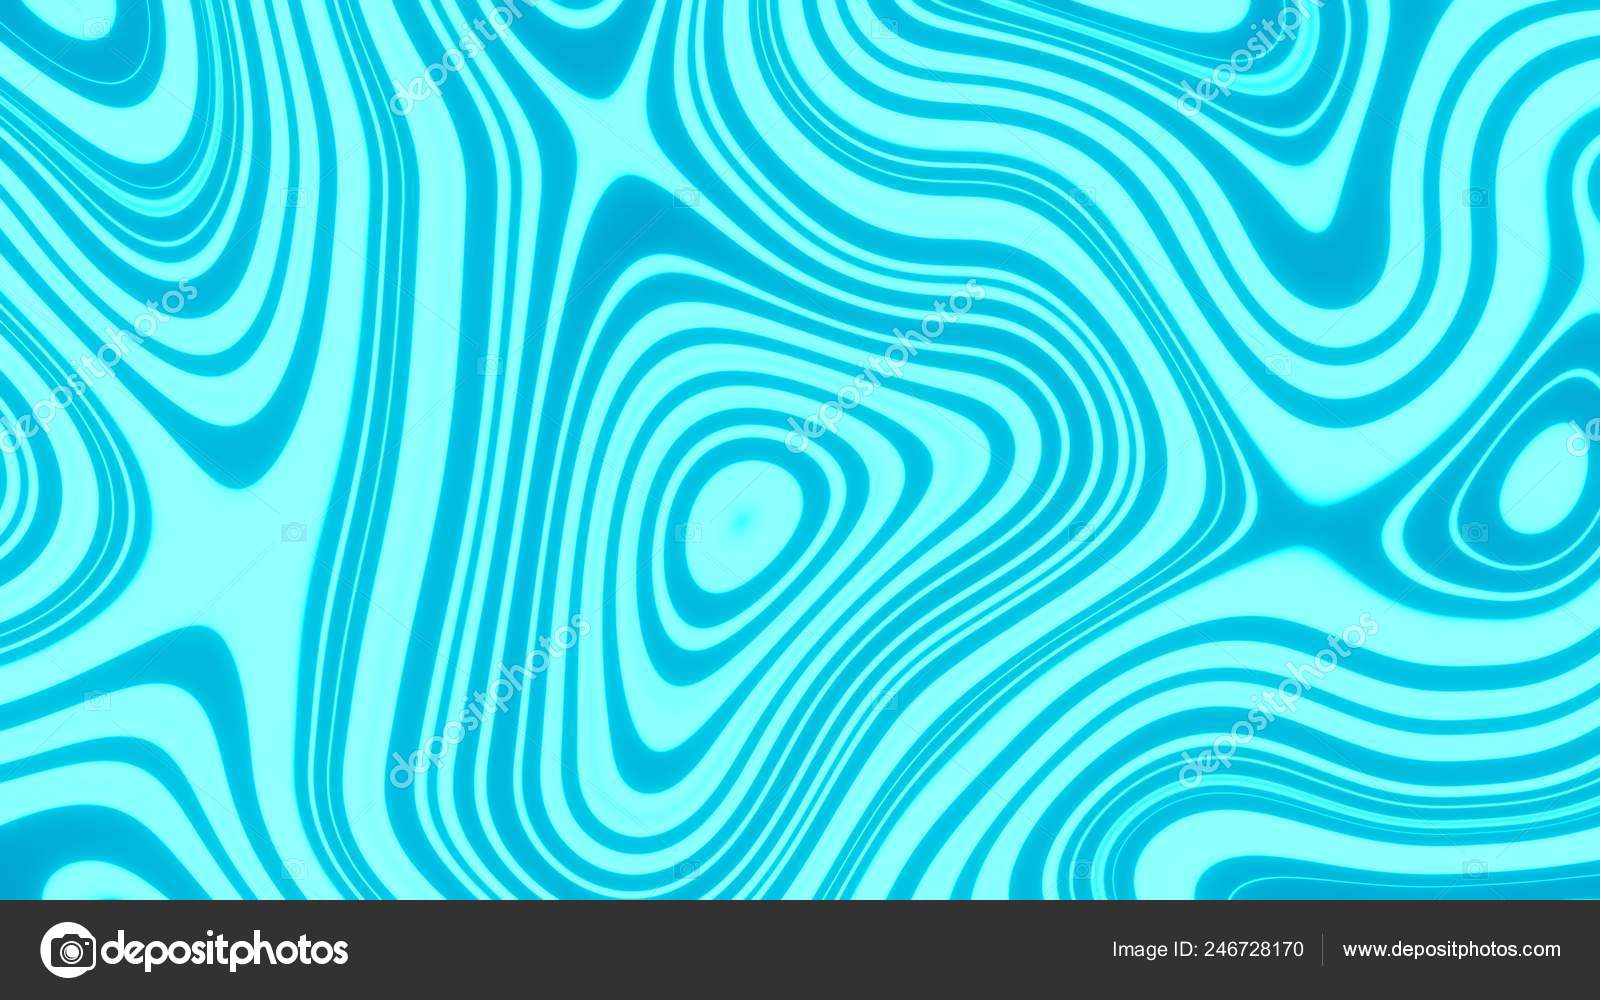 Blue Psychedelic , HD Wallpaper & Backgrounds